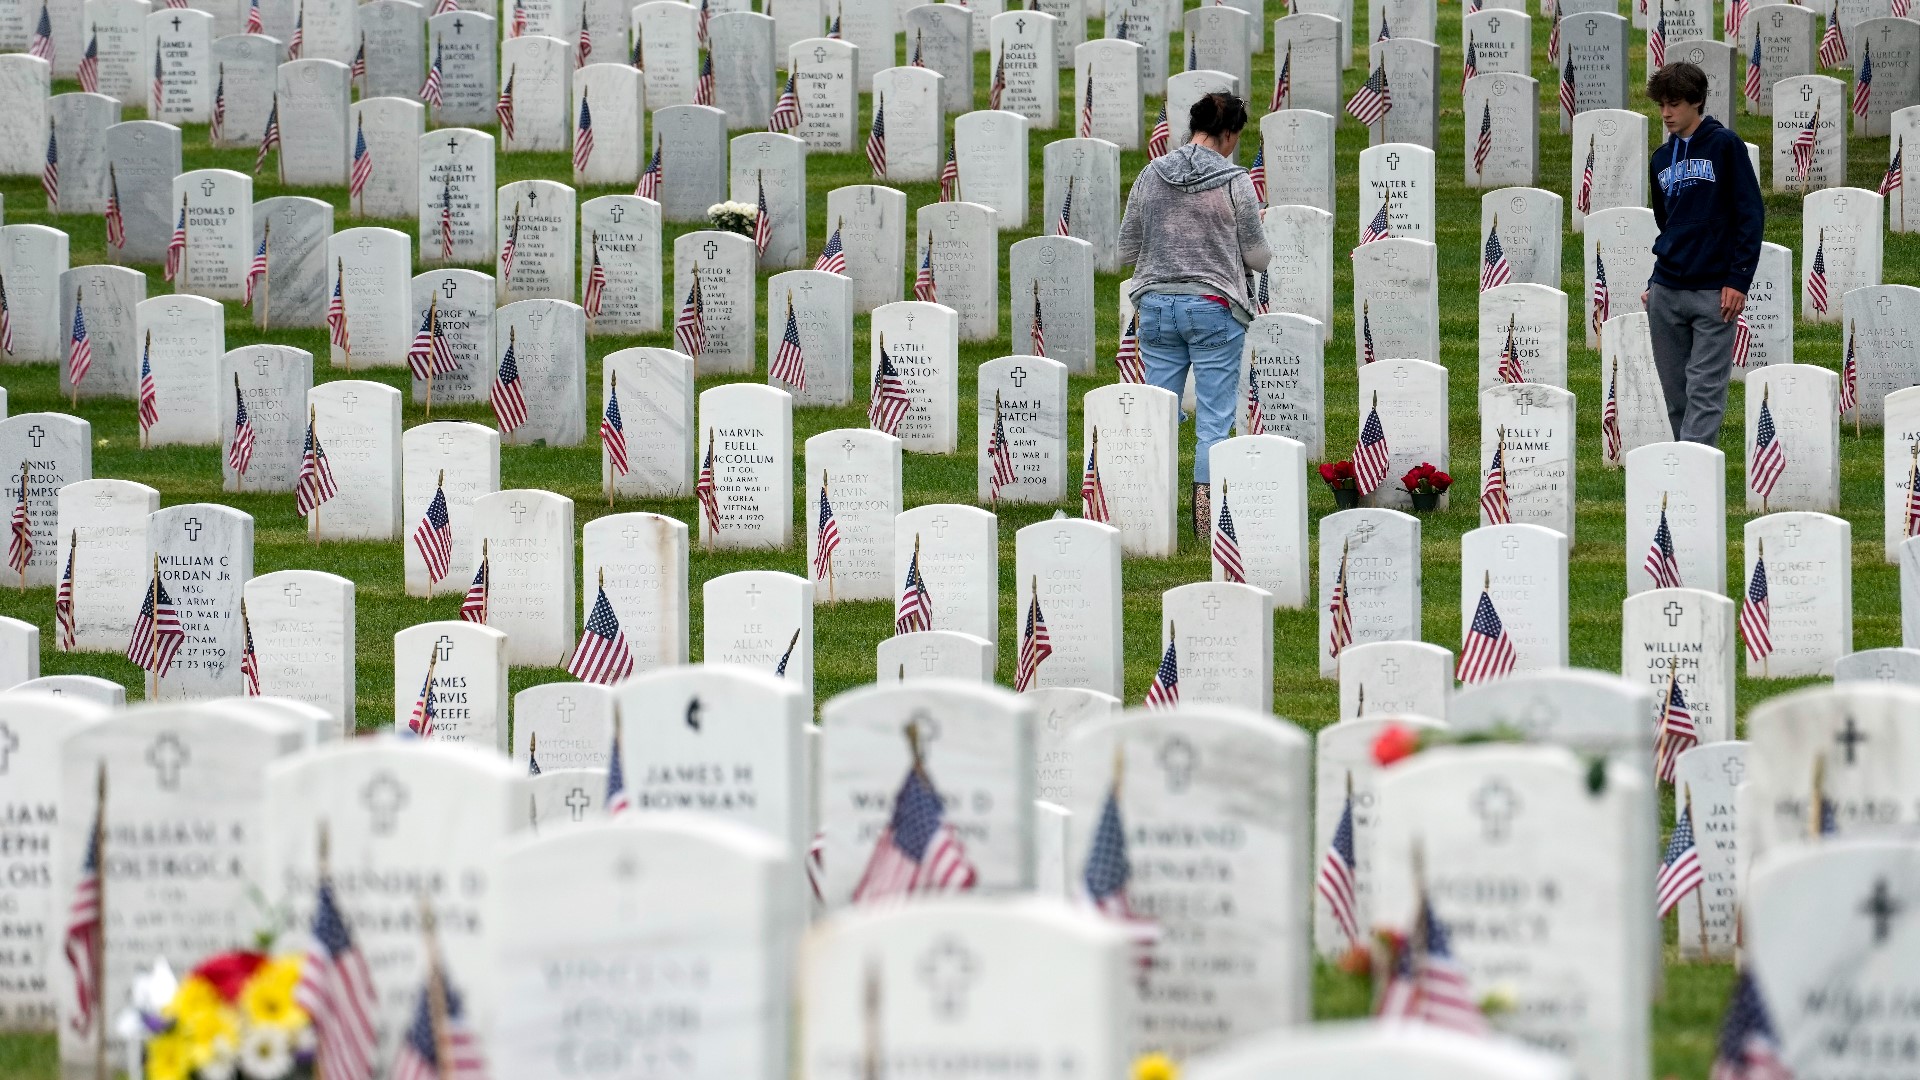 President Joe Biden lauded the sacrifice of generations of U.S. troops who died fighting for their country as he marked Memorial Day.